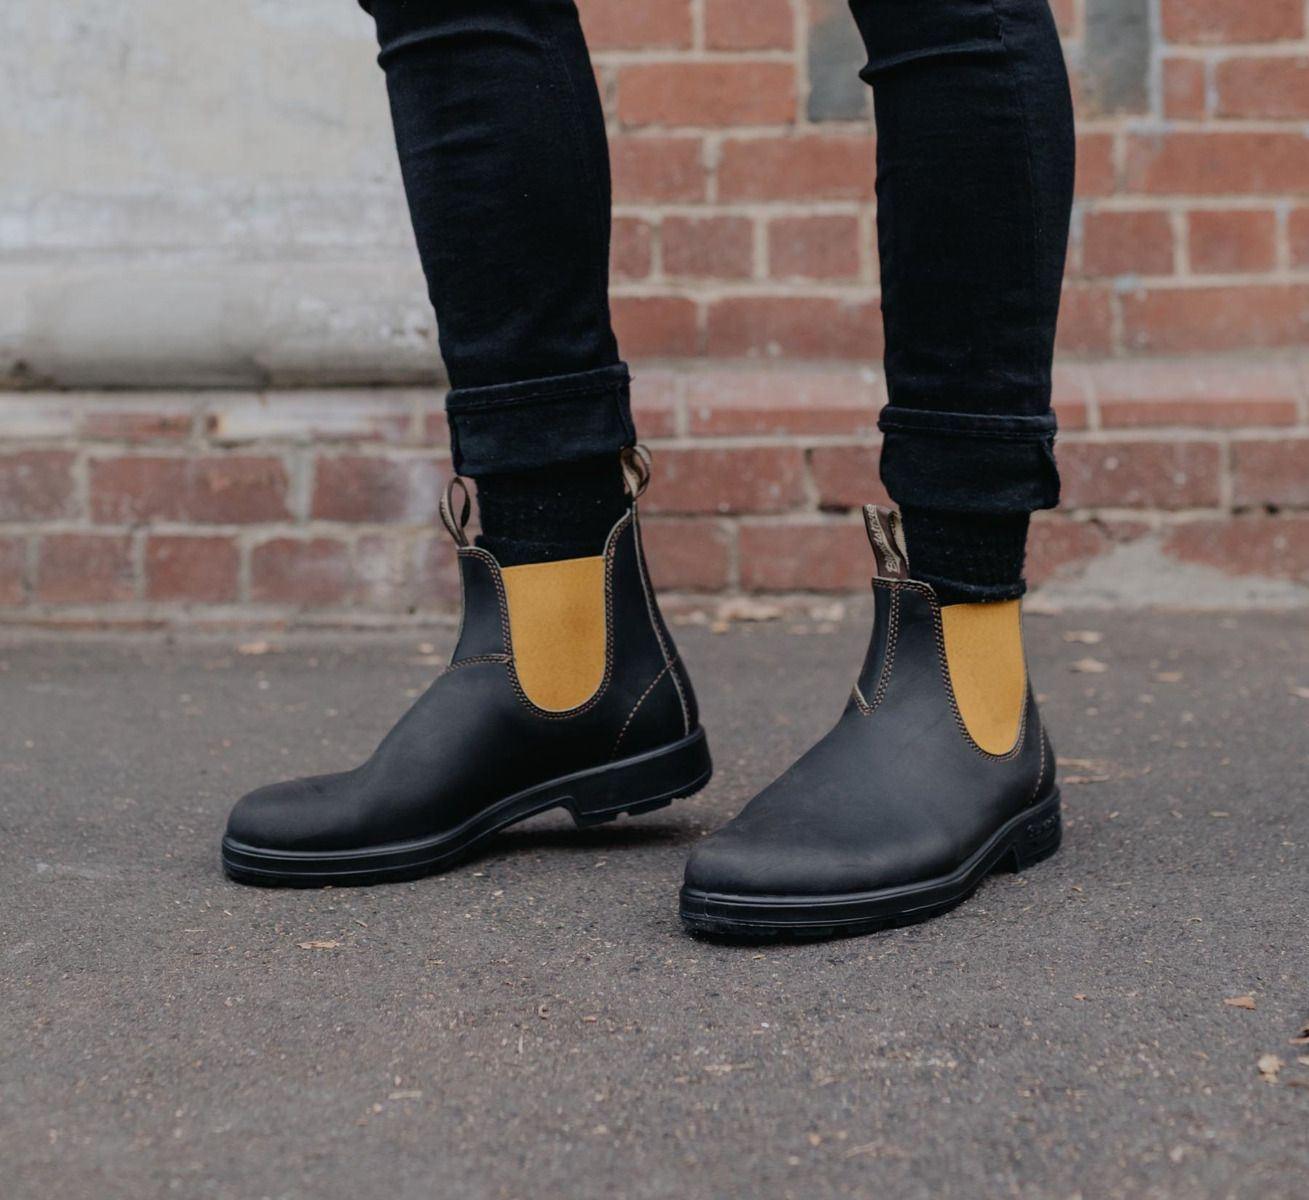 Blundstone 1919 Brown Mustard Leather Chelsea Boots Stitch Camel Slip On - Knighthood Store